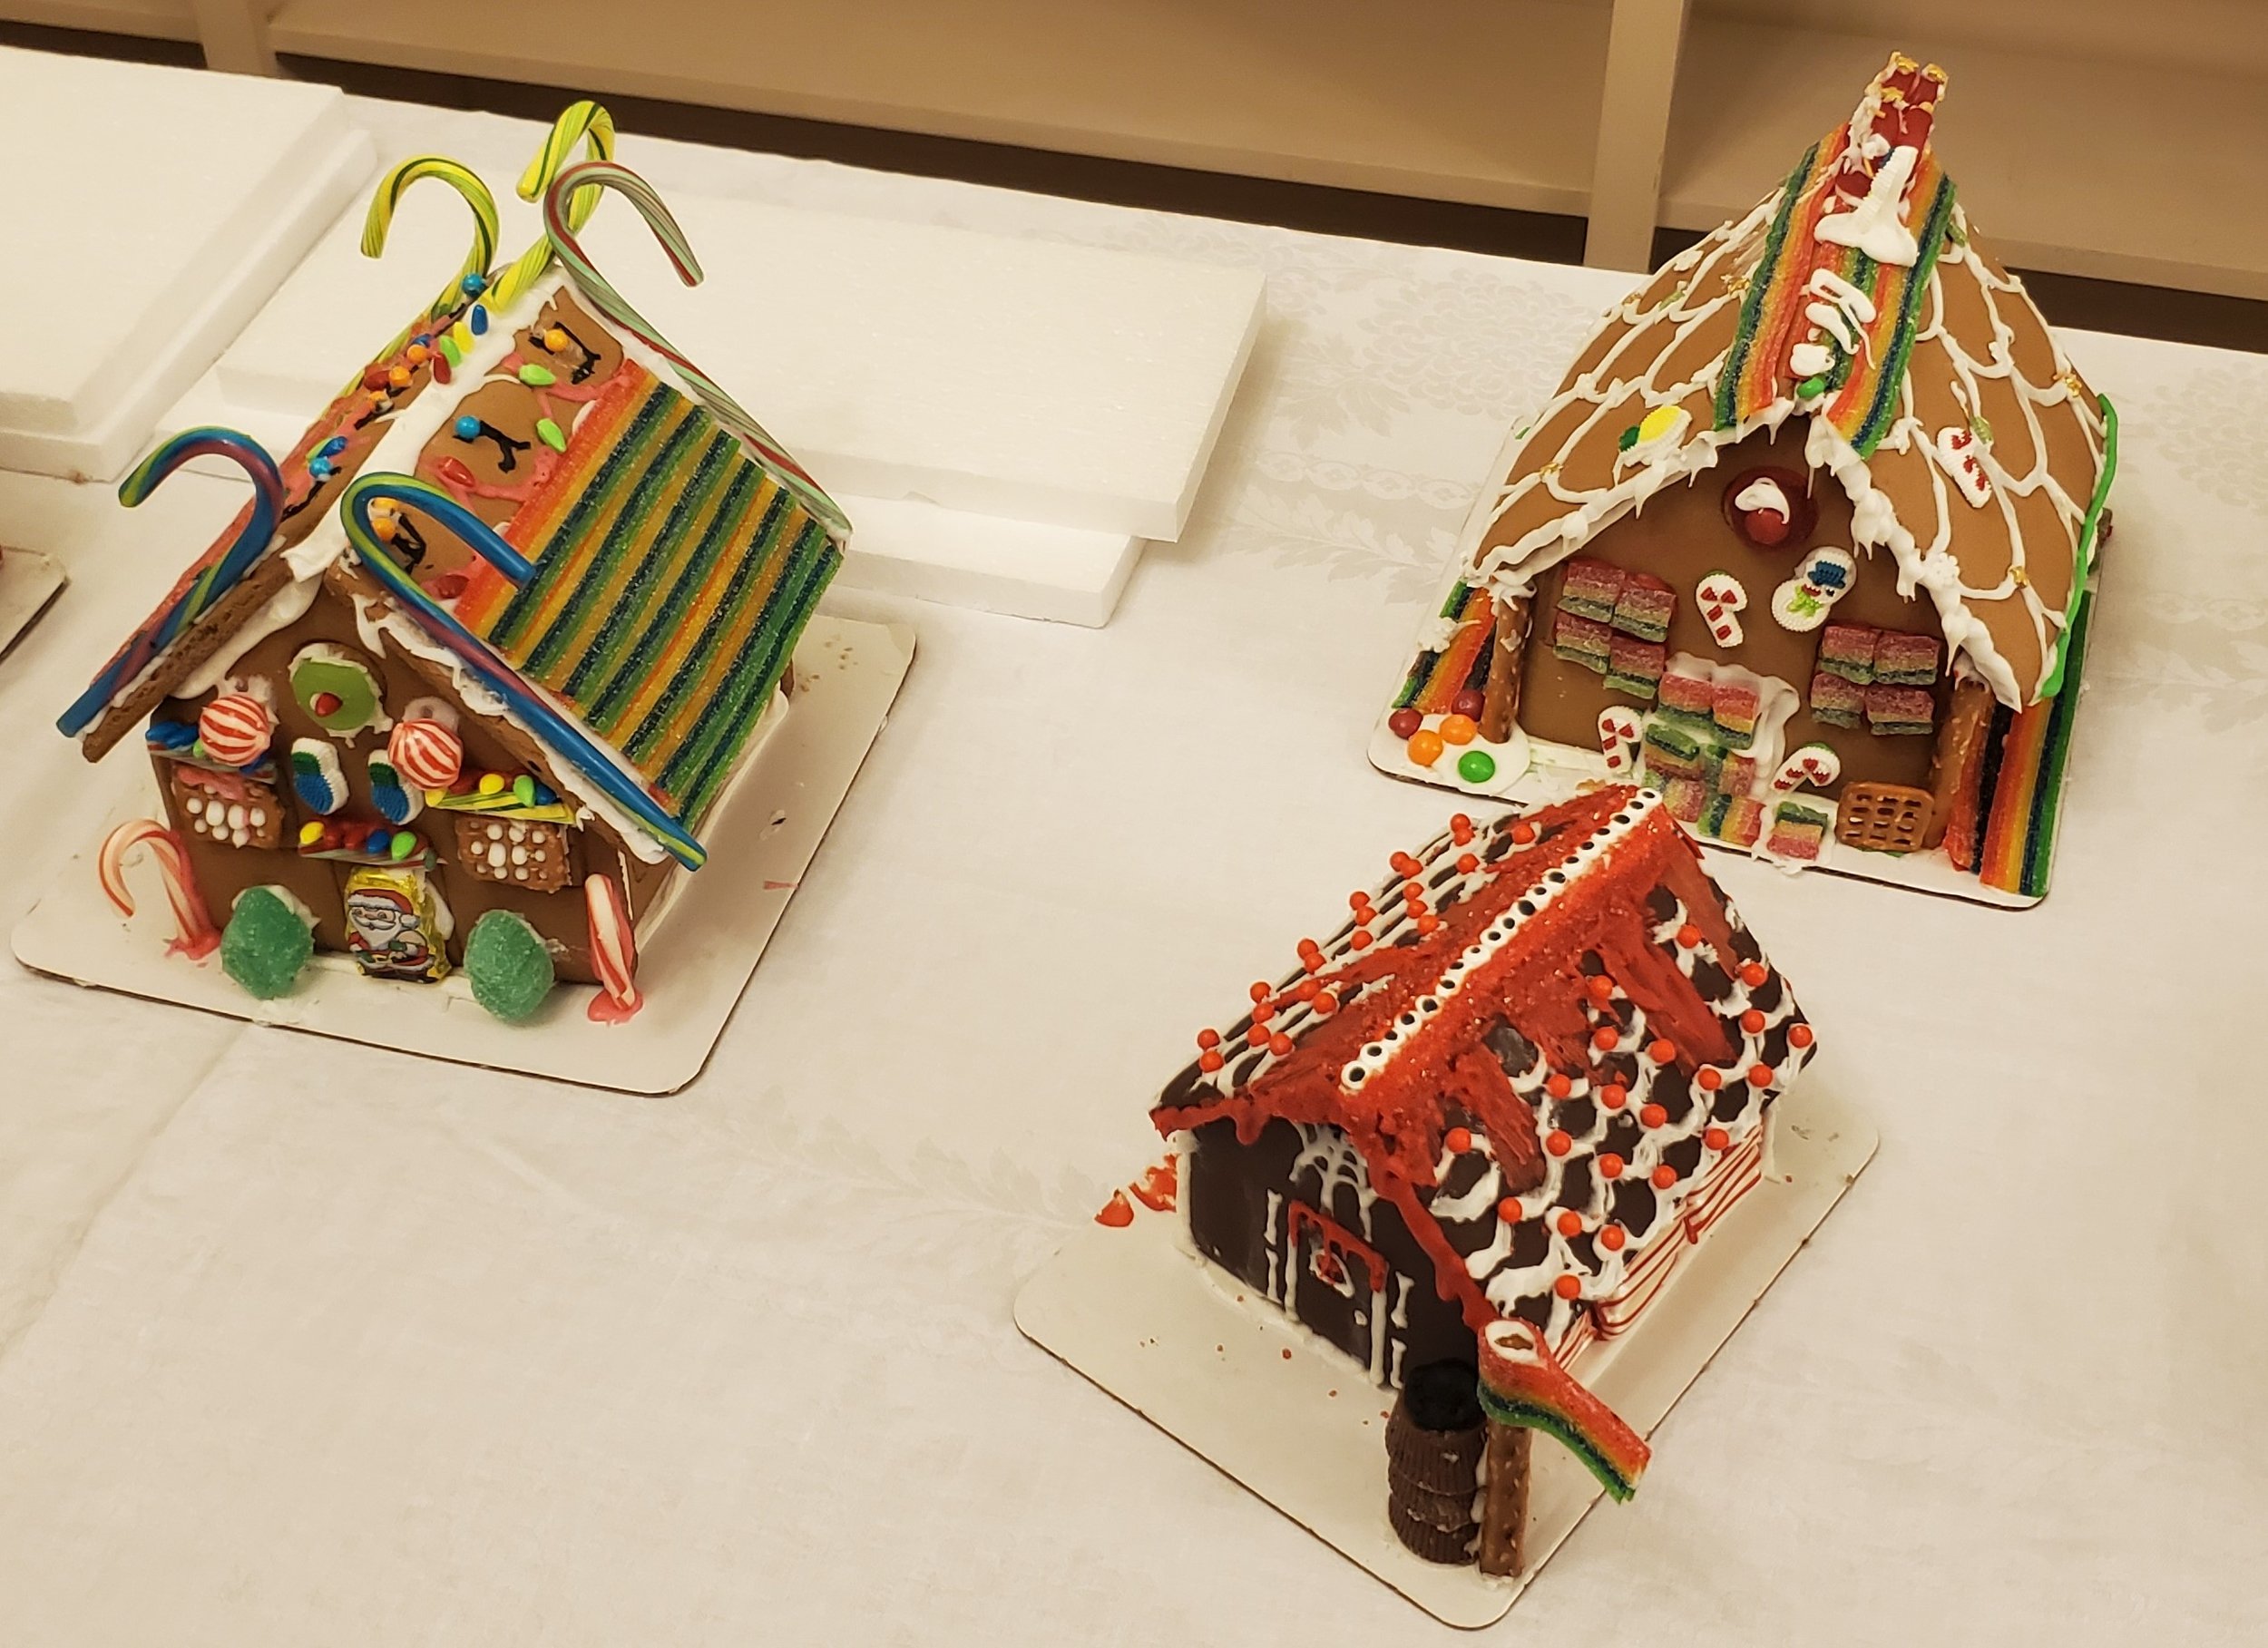 2022-12 - First Friday Gingerbread Houses (2).jpg